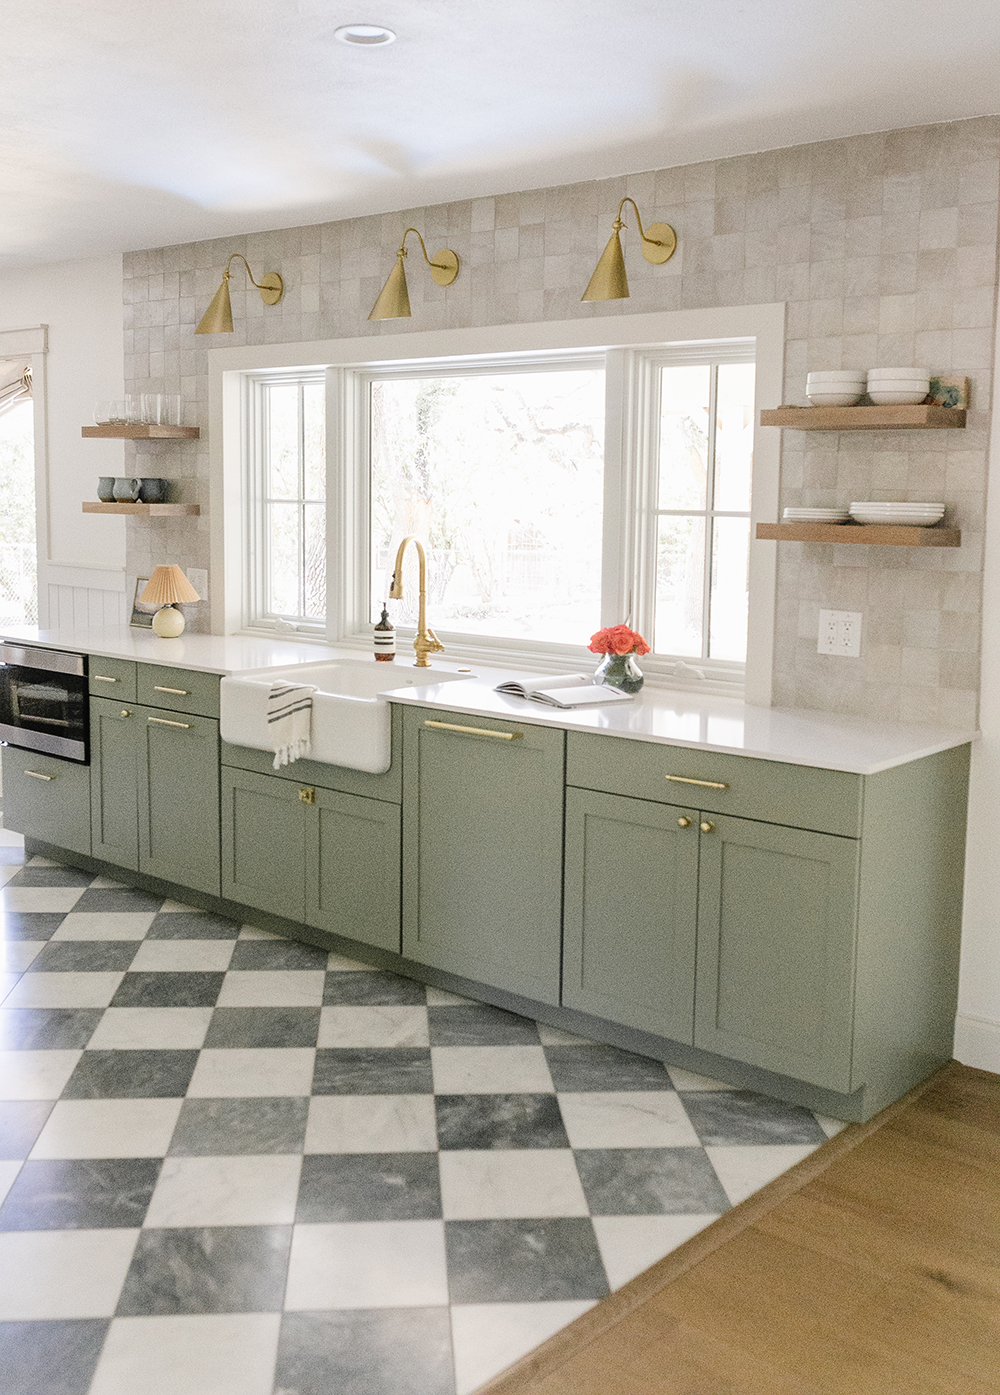 livvyland-blog-kitchen-cozy-french-country-cottage-diamond-check-tile-marble-floor-green-cabinets-silestone-el-statuario-quartz-countertops-mitzi-lupe-sconce-3-panel-window-over-sink